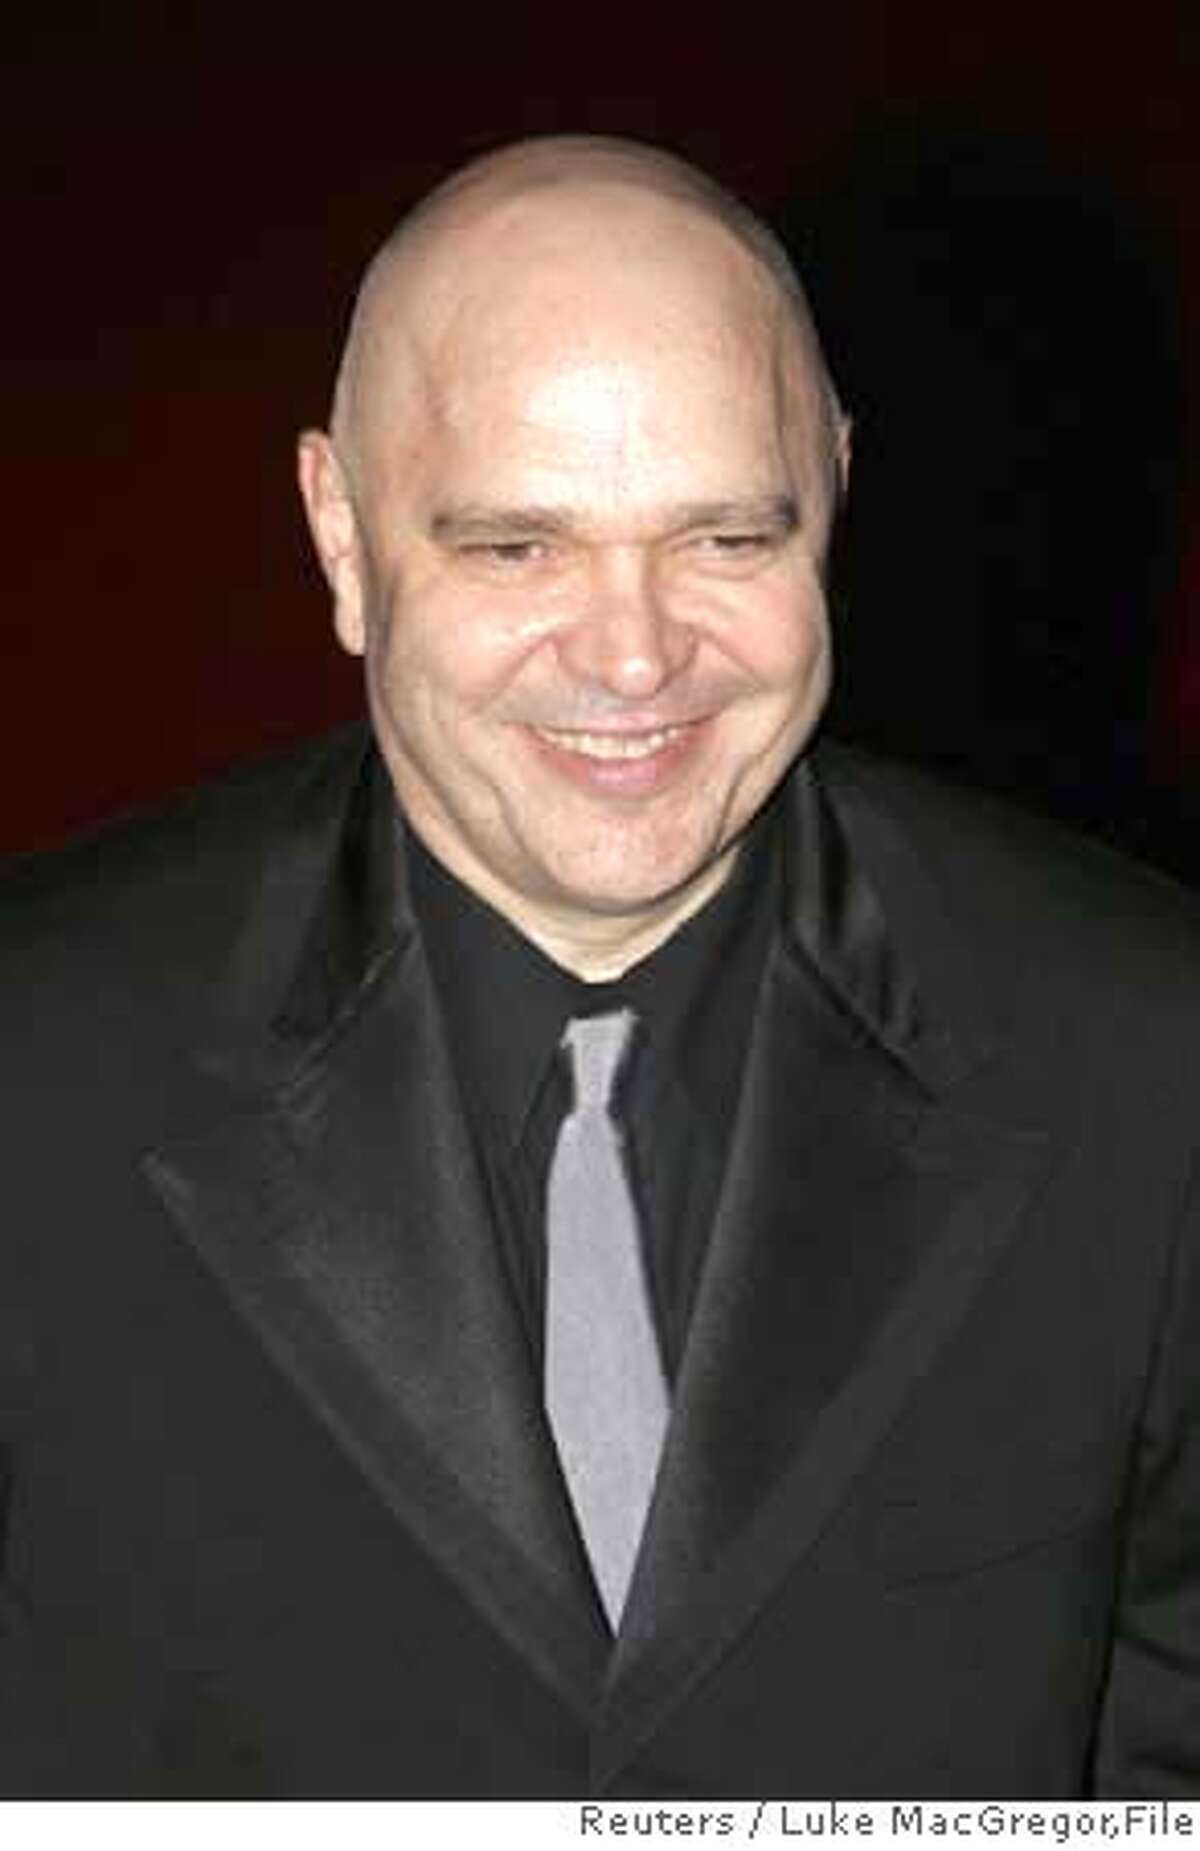 ###Live Caption:Oscar-winning British film director Anthony Minghella arrives for the European premiere of the film 'The Last King of Scotland' on the opening night of the 50th London Film Festival in this October 18, 2006 file photo. Minghella has died aged 54, a spokeswoman for his agent said on March 18, 2008. REUTERS/Luke MacGregor/Files (BRITAIN)###Caption History:Oscar-winning British film director Anthony Minghella arrives for the European premiere of the film 'The Last King of Scotland' on the opening night of the 50th London Film Festival in this October 18, 2006 file photo. Minghella has died aged 54, a spokeswoman for his agent said on March 18, 2008. REUTERS/Luke MacGregor/Files (BRITAIN)###Notes:File photo of Minghella arriving for premiere of "The Last King of Scotland" in London###Special Instructions:0